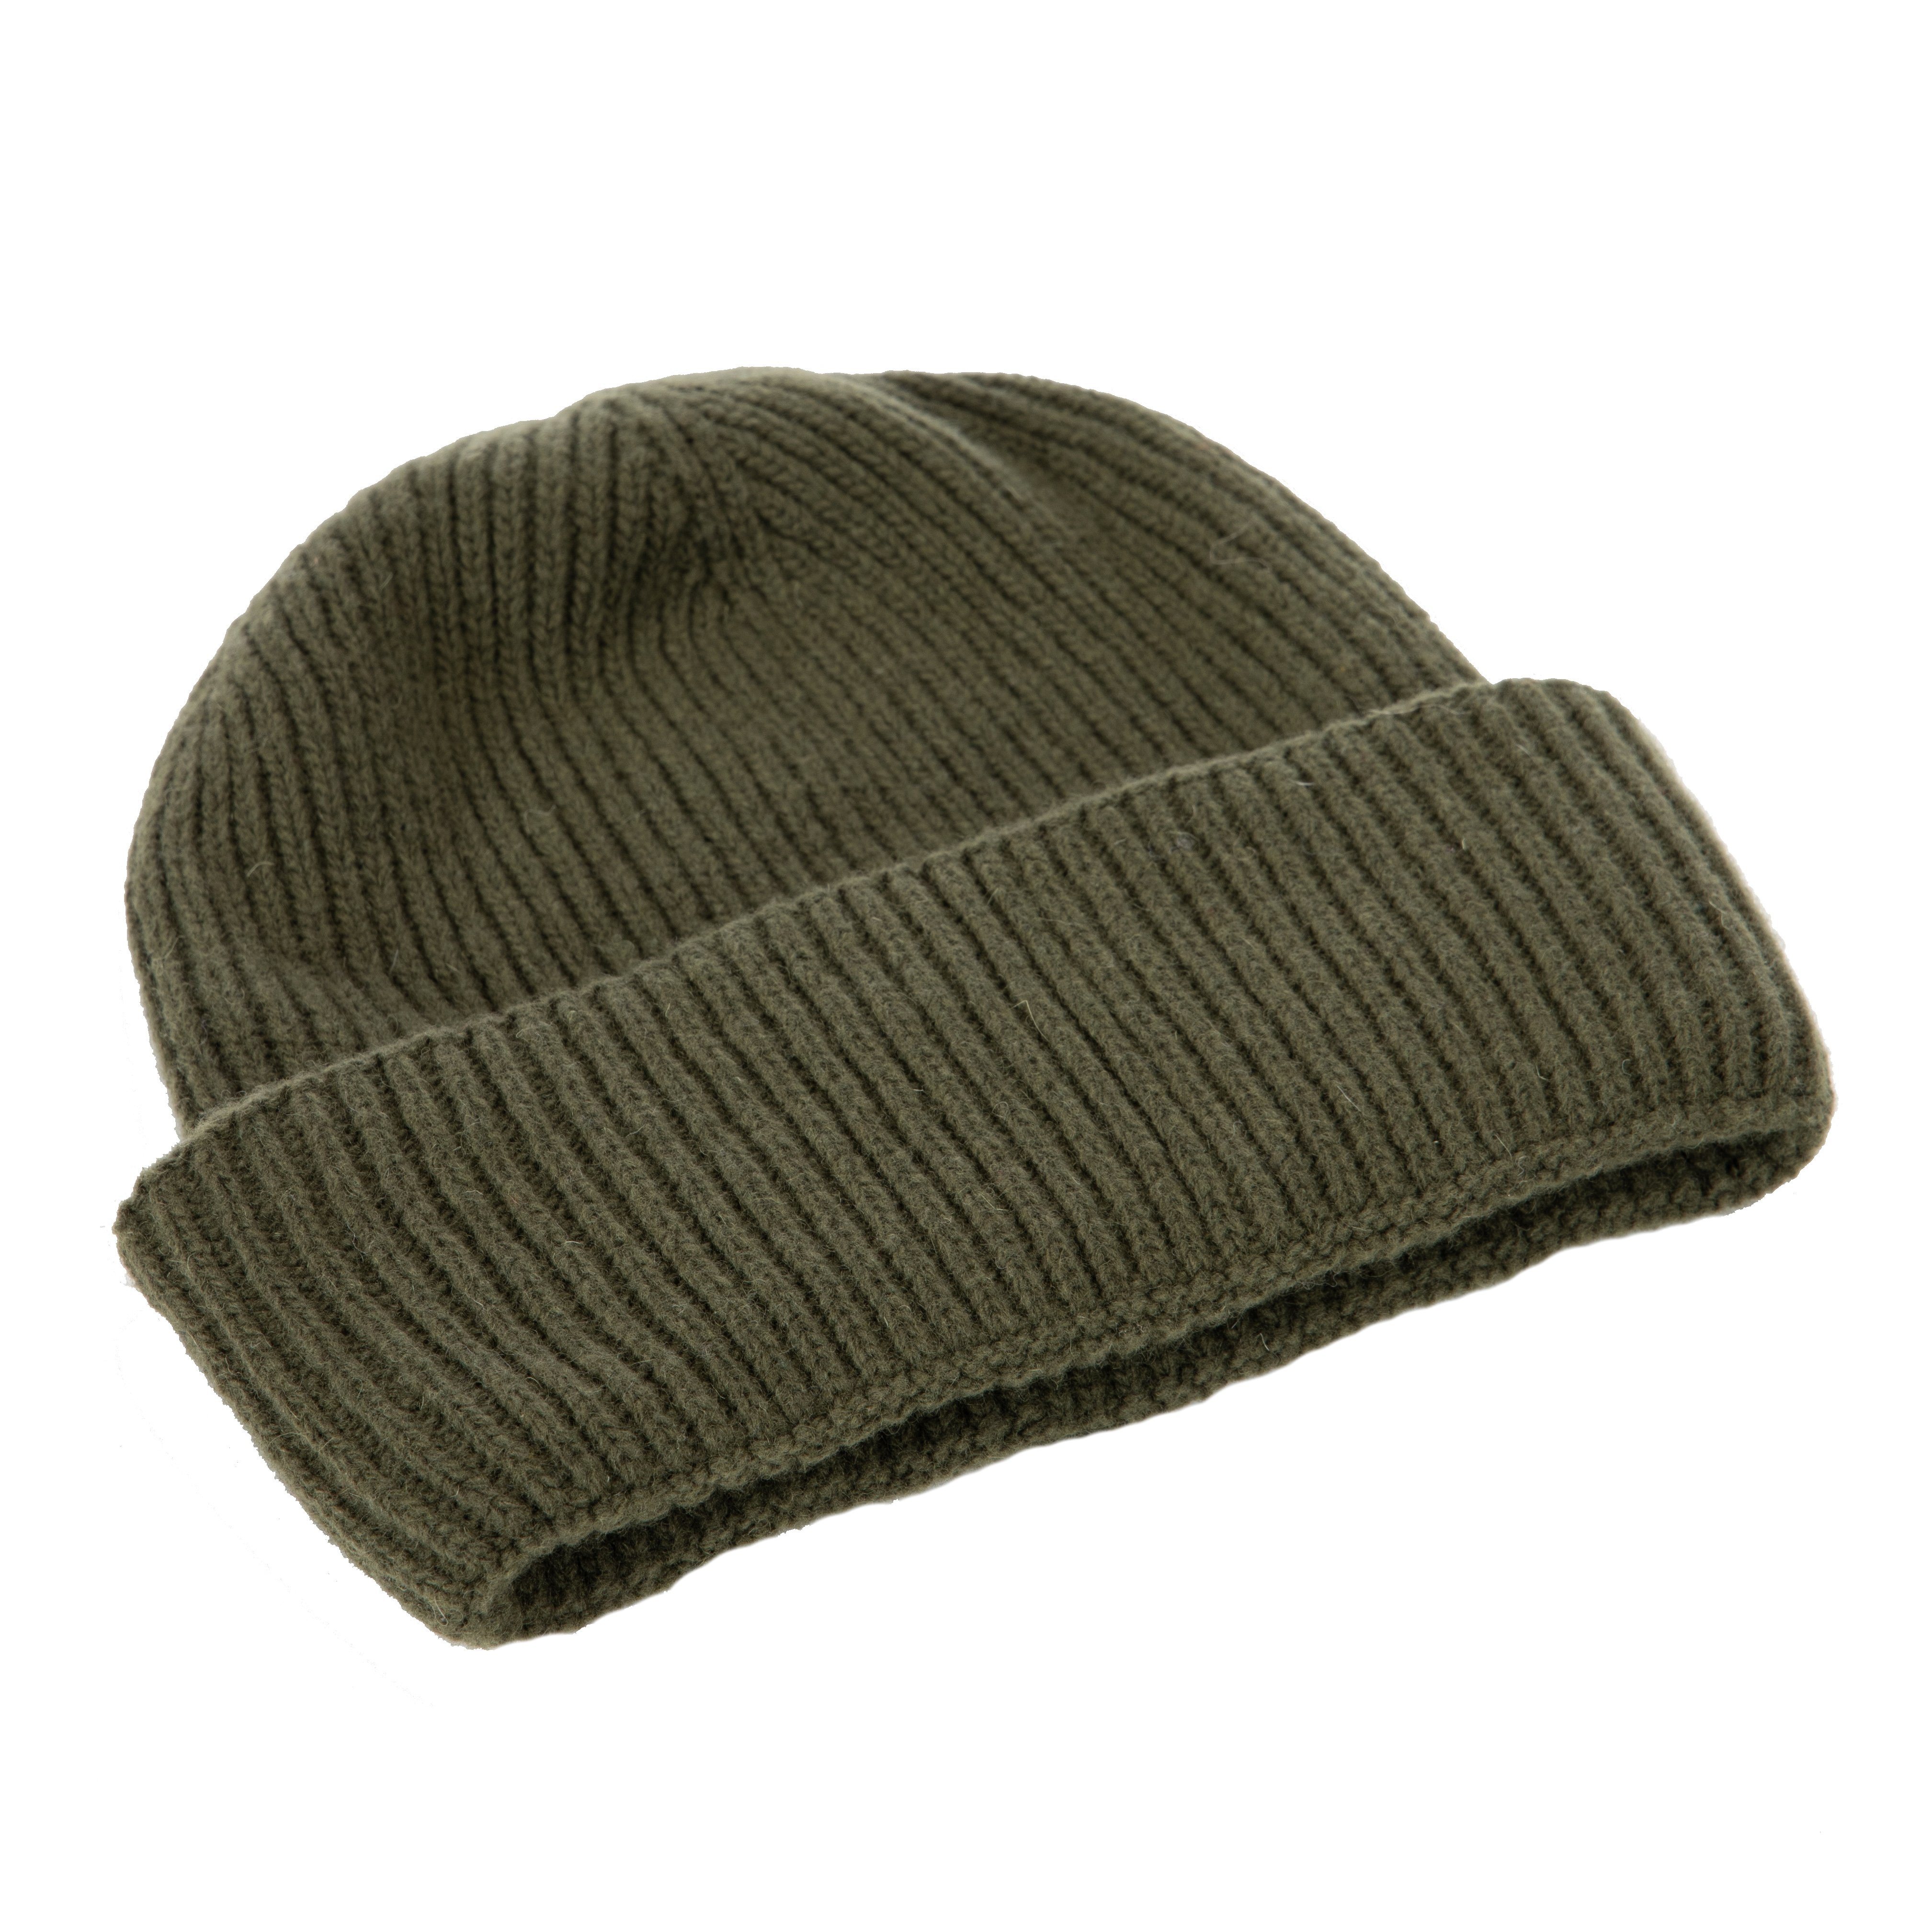 North Outdoor Kulo Beanie - 100% Merino Wool - Made in Finland, Olive Green